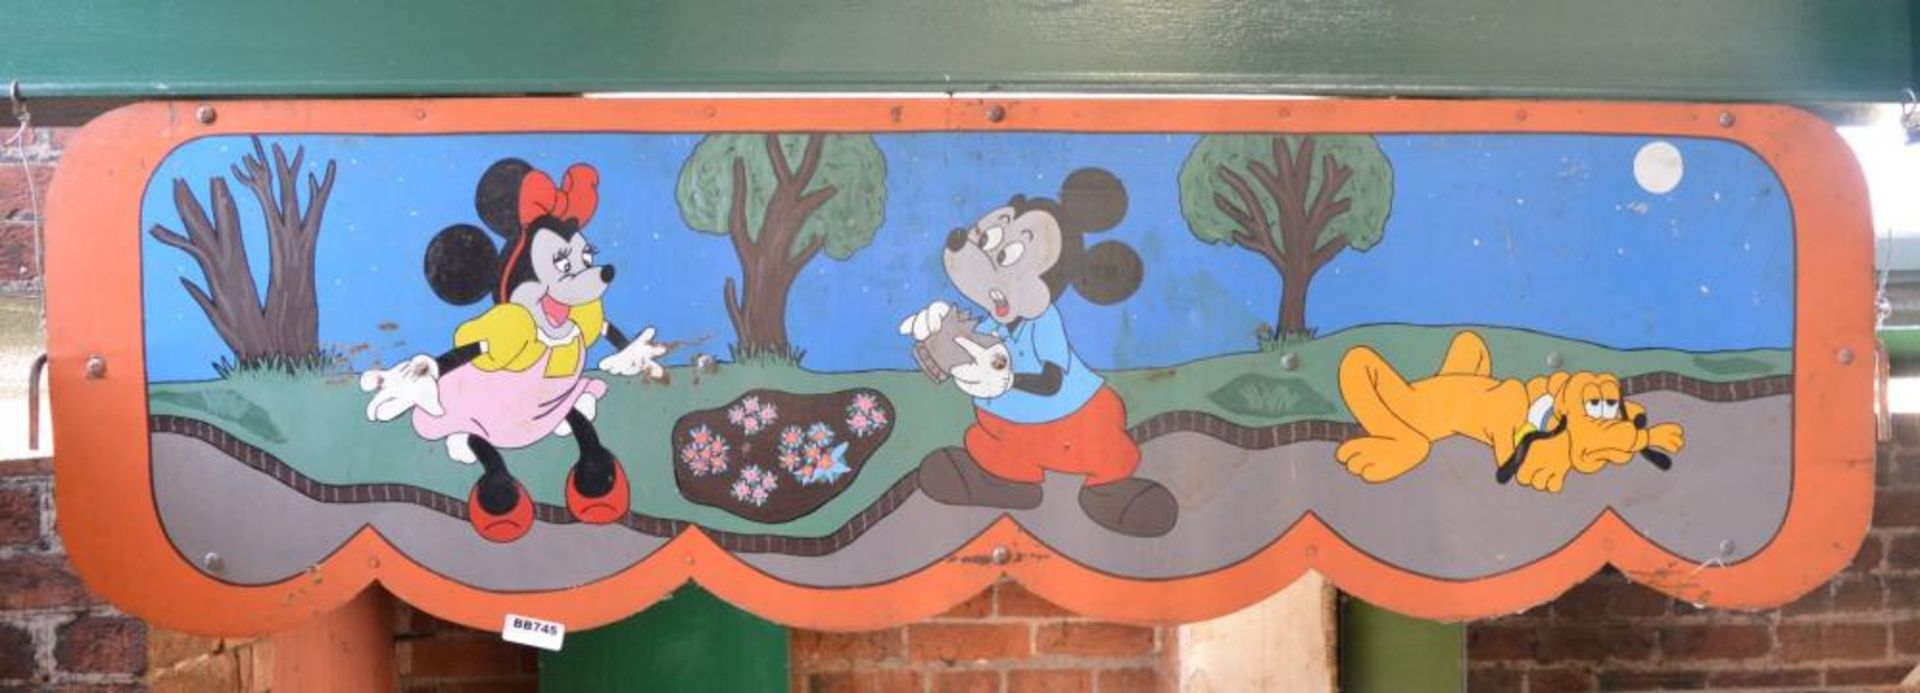 1 x Vintage Metal Hand Painted Fairground Ride Barrier Fence Panel With Braced Back and Mounting Hoo - Image 2 of 7